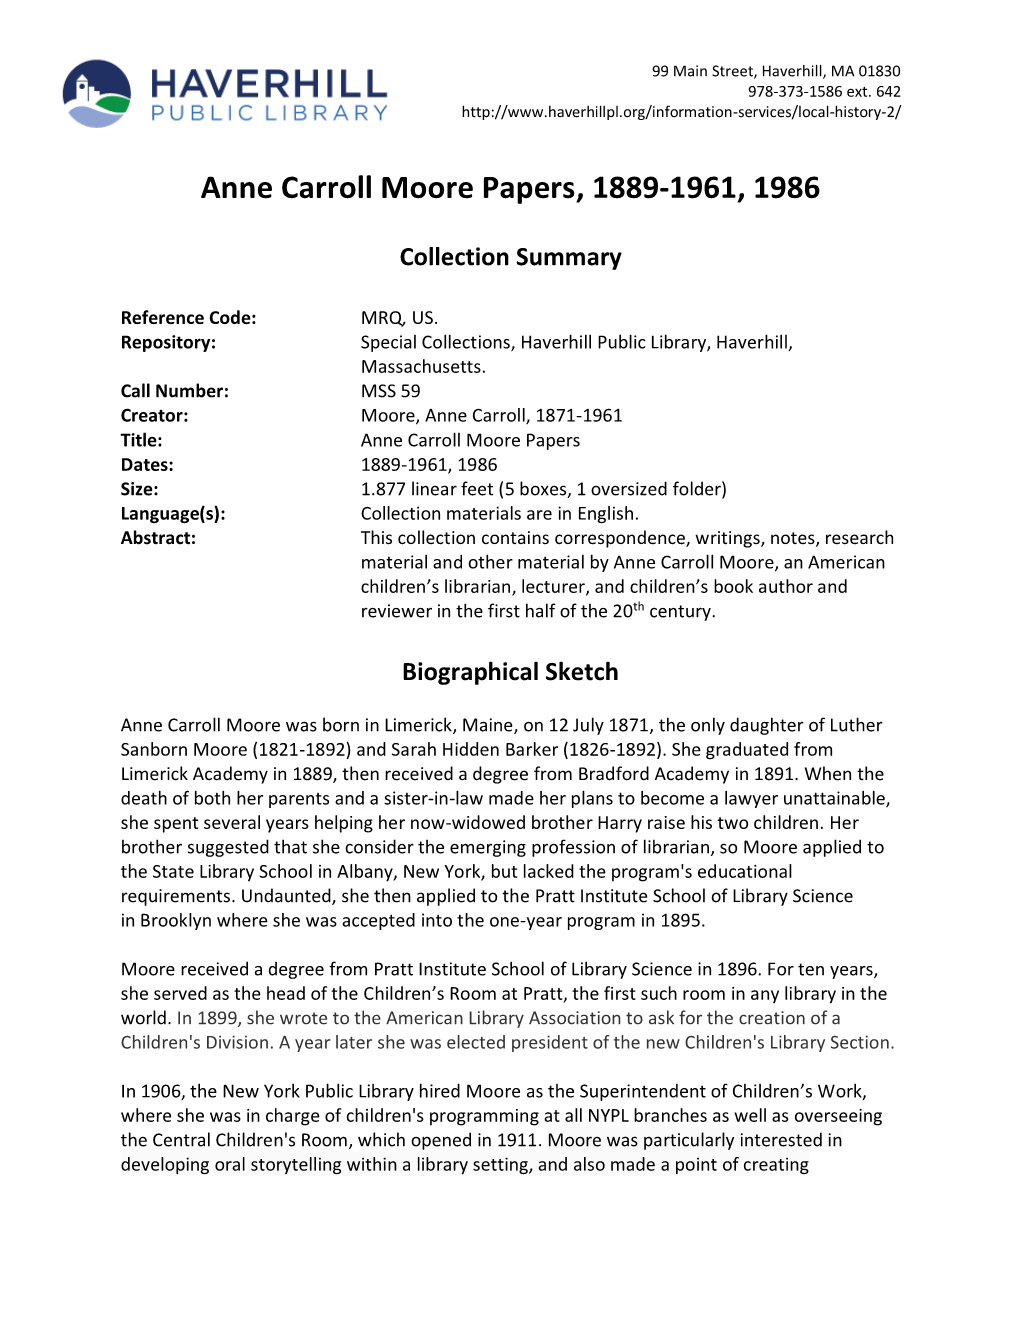 Anne Carroll Moore Papers, 1889-1961, 1986